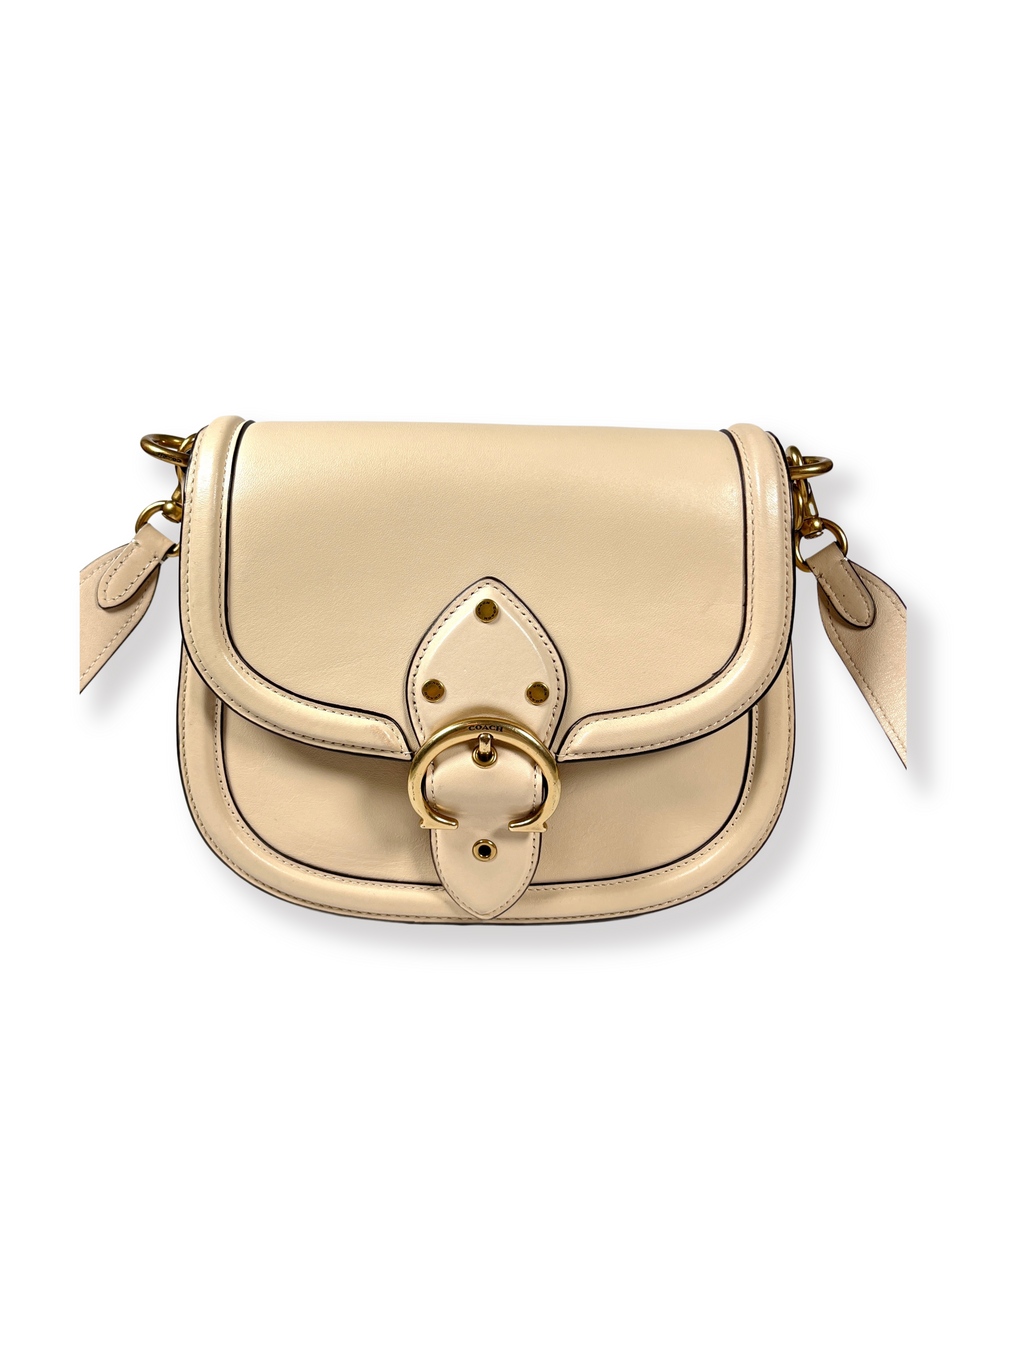 COACH - BEAT SADDLE BAG IN IVORY LEATHER